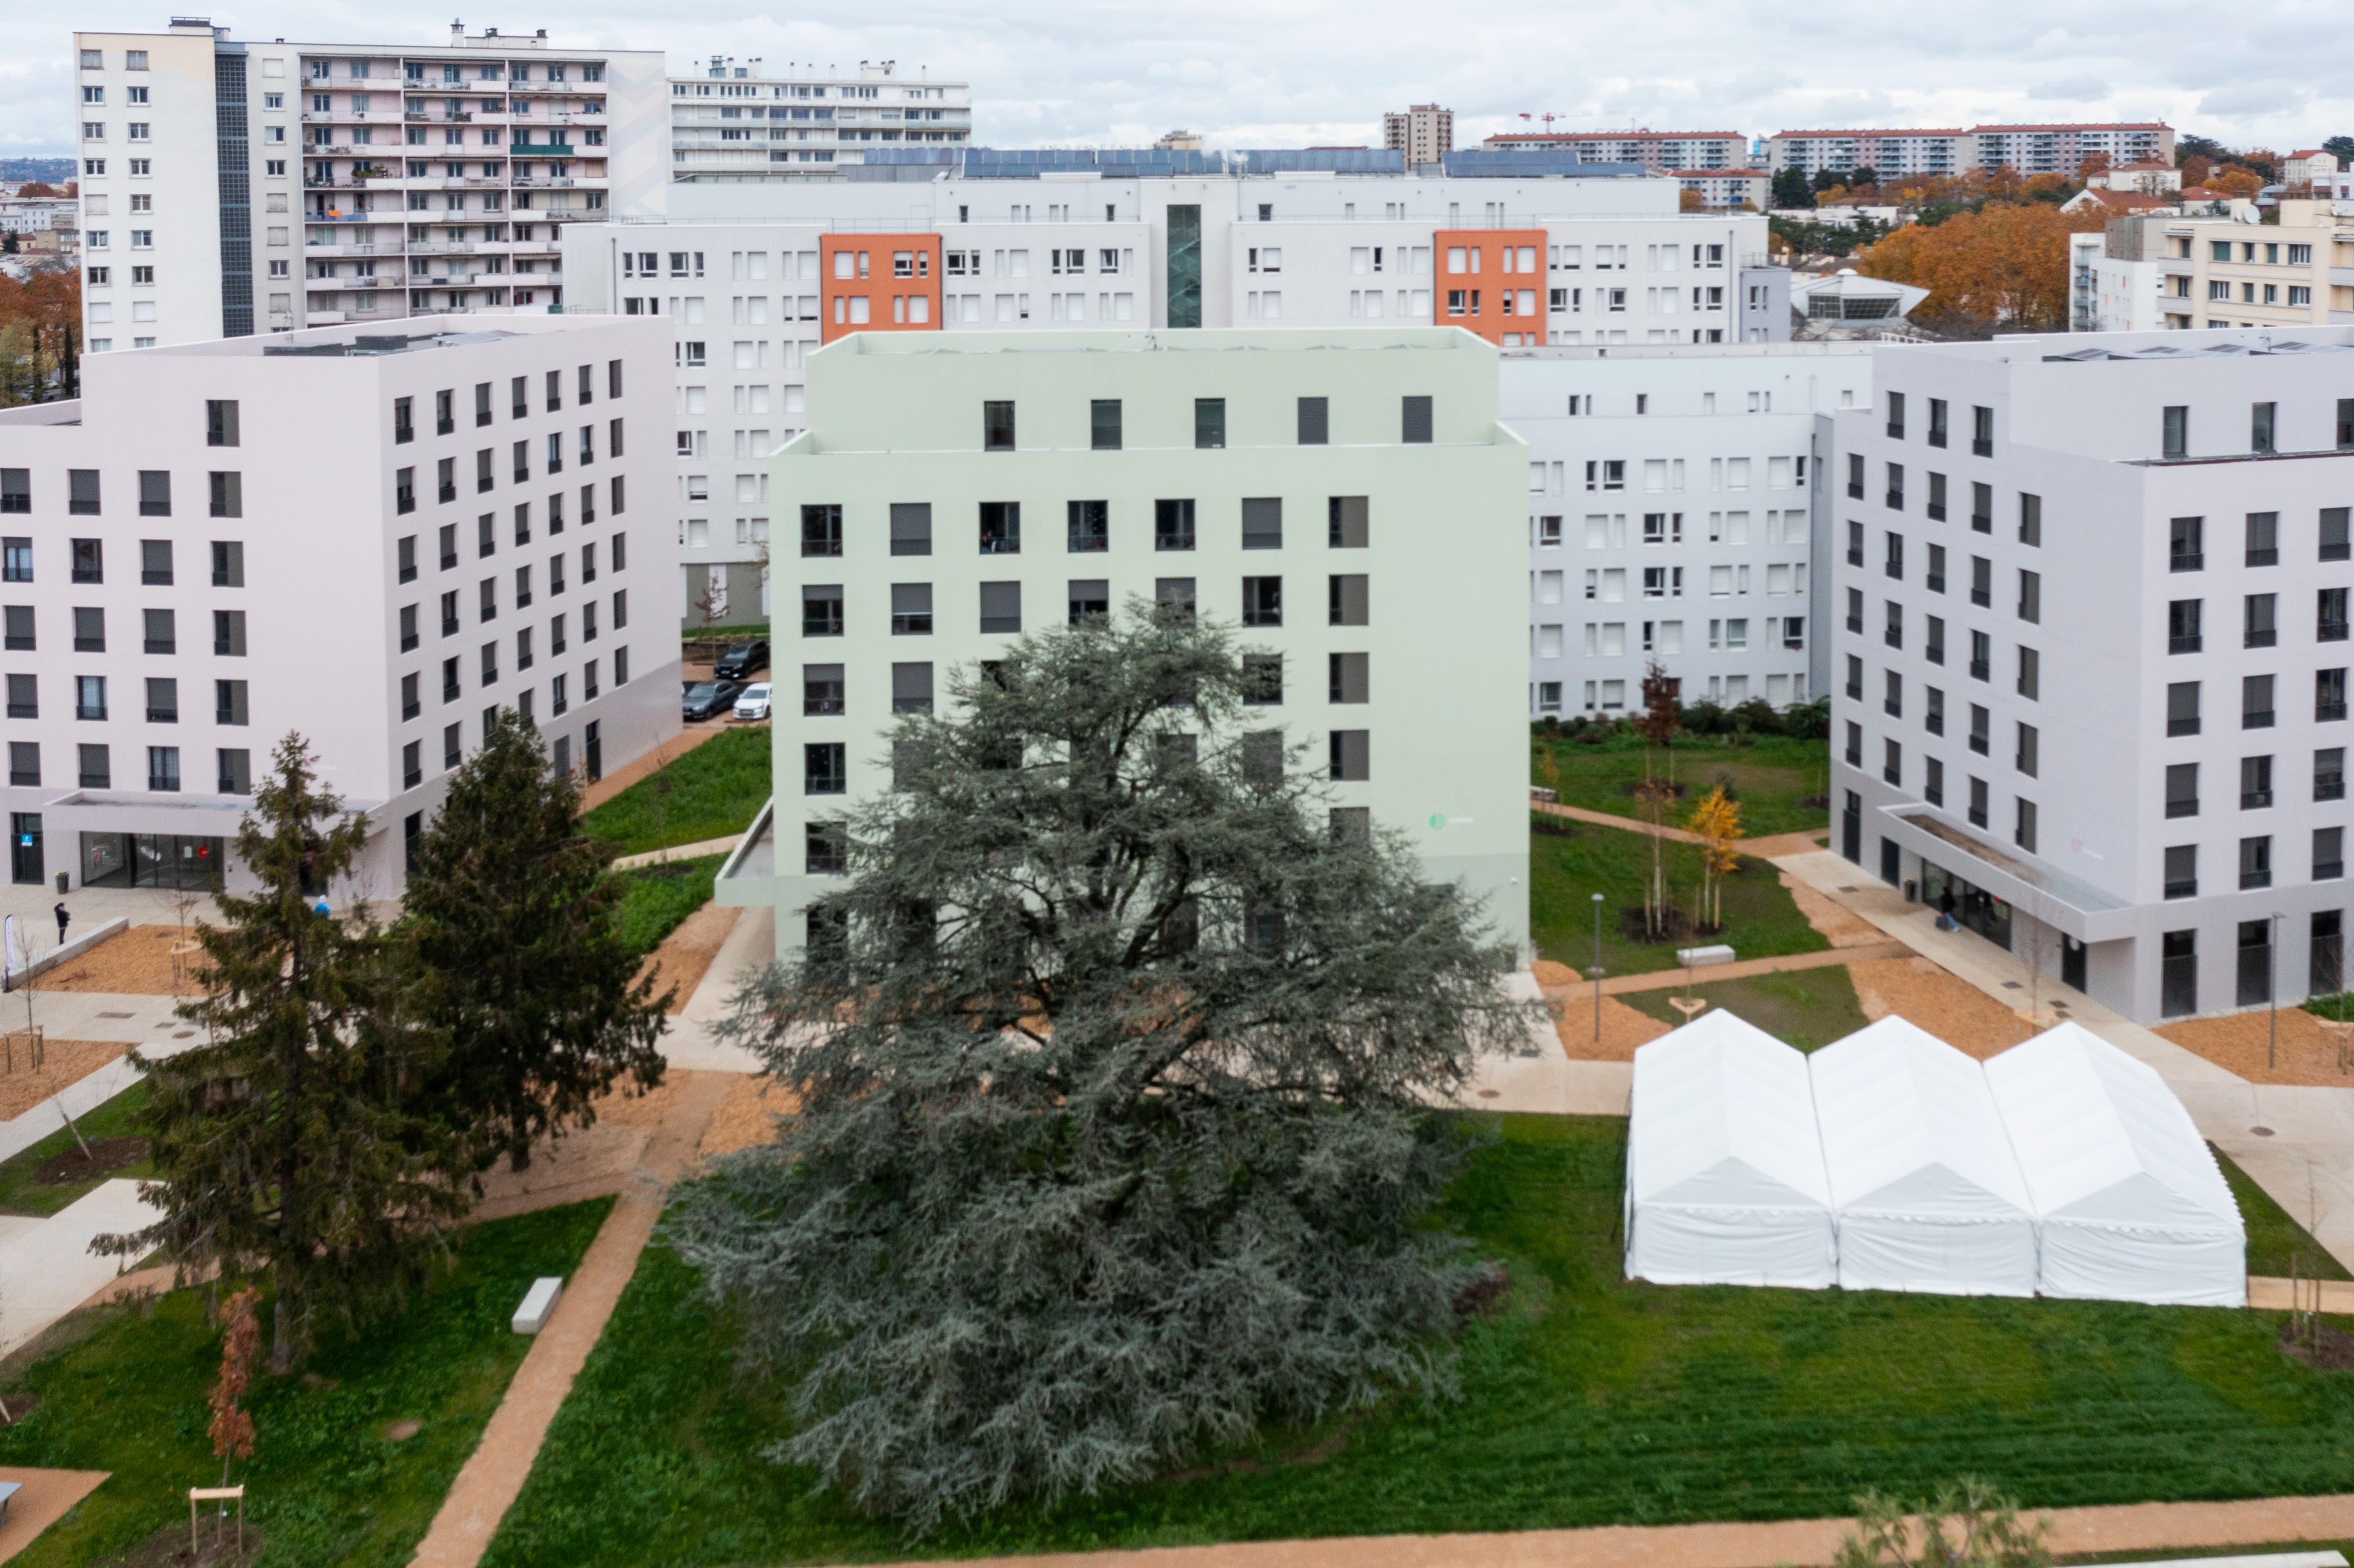 CROUS LYON INAUGURATION RESIDENCE CLAUDIE HAIGNERE VUE DRONE 29NOV22 ©Thierry Perre 101